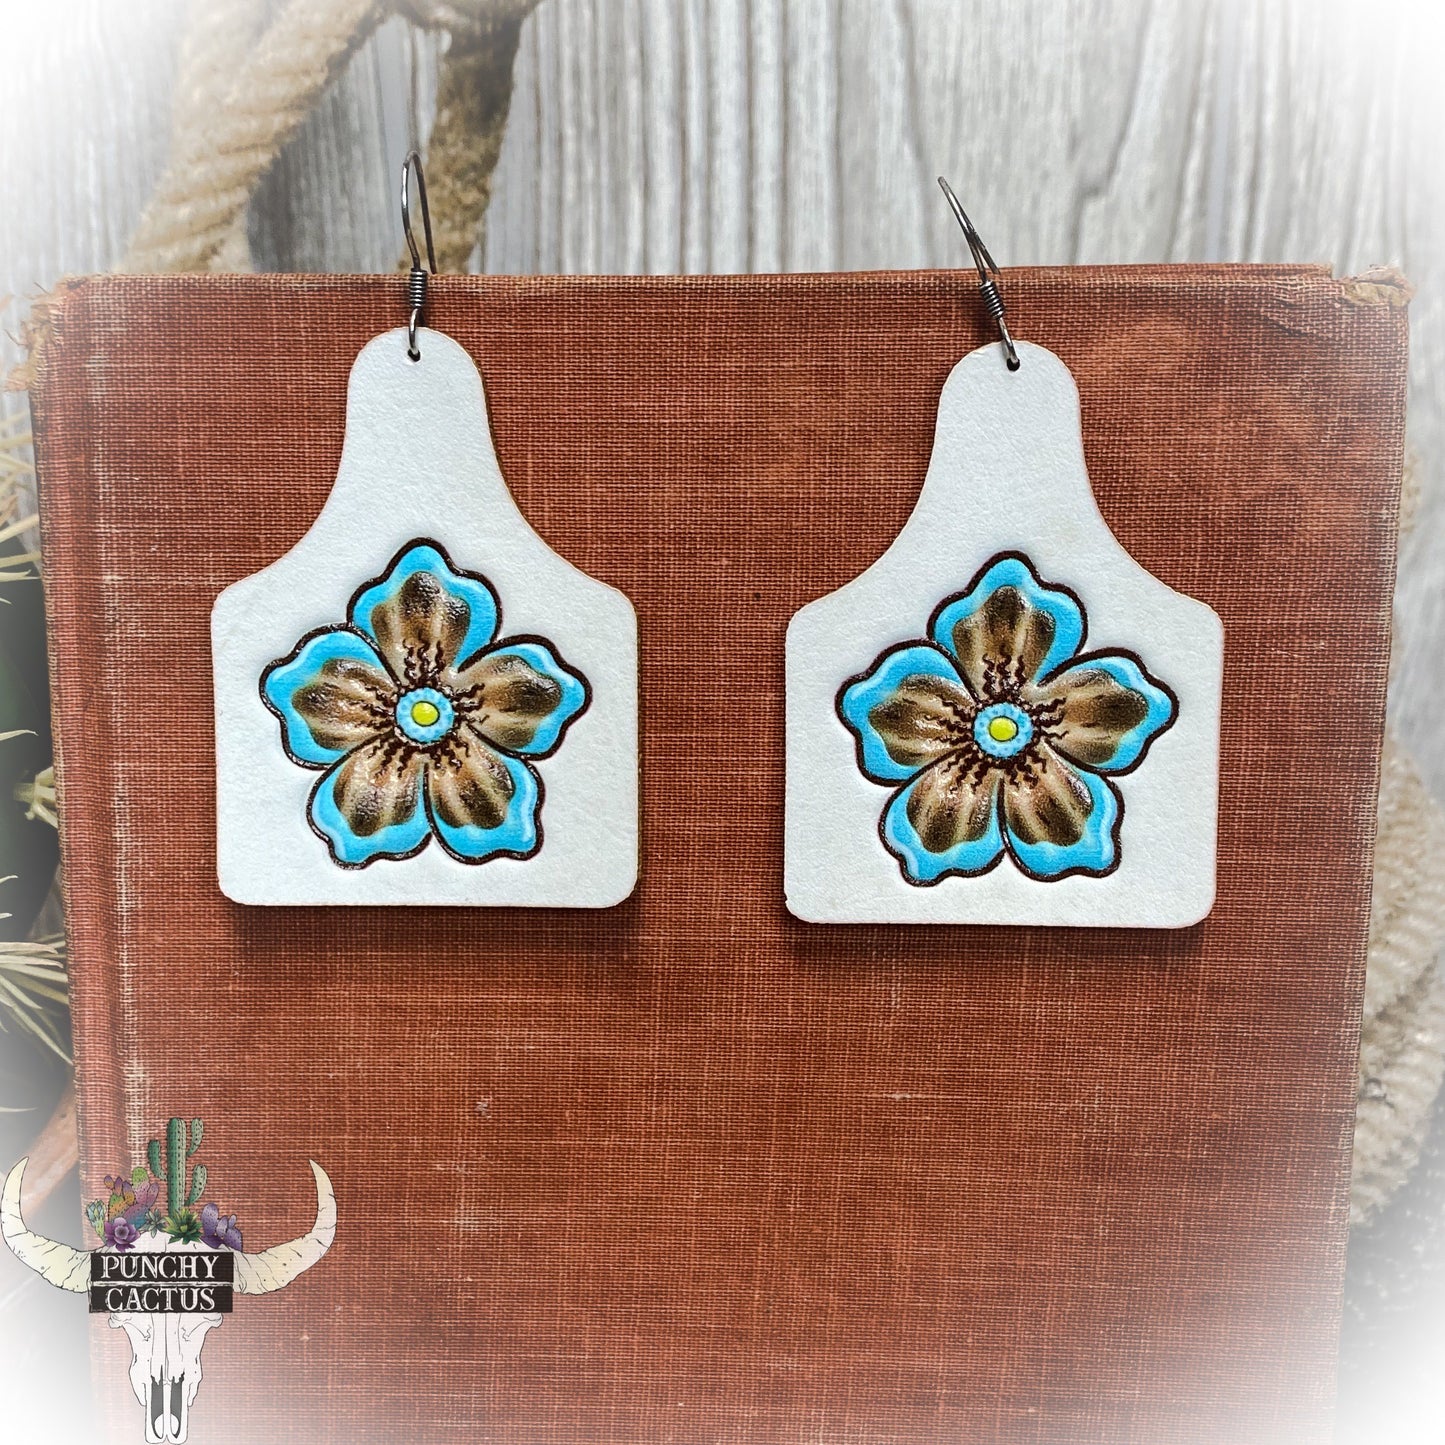 western leather cow tag earrings with flower center tooling - white